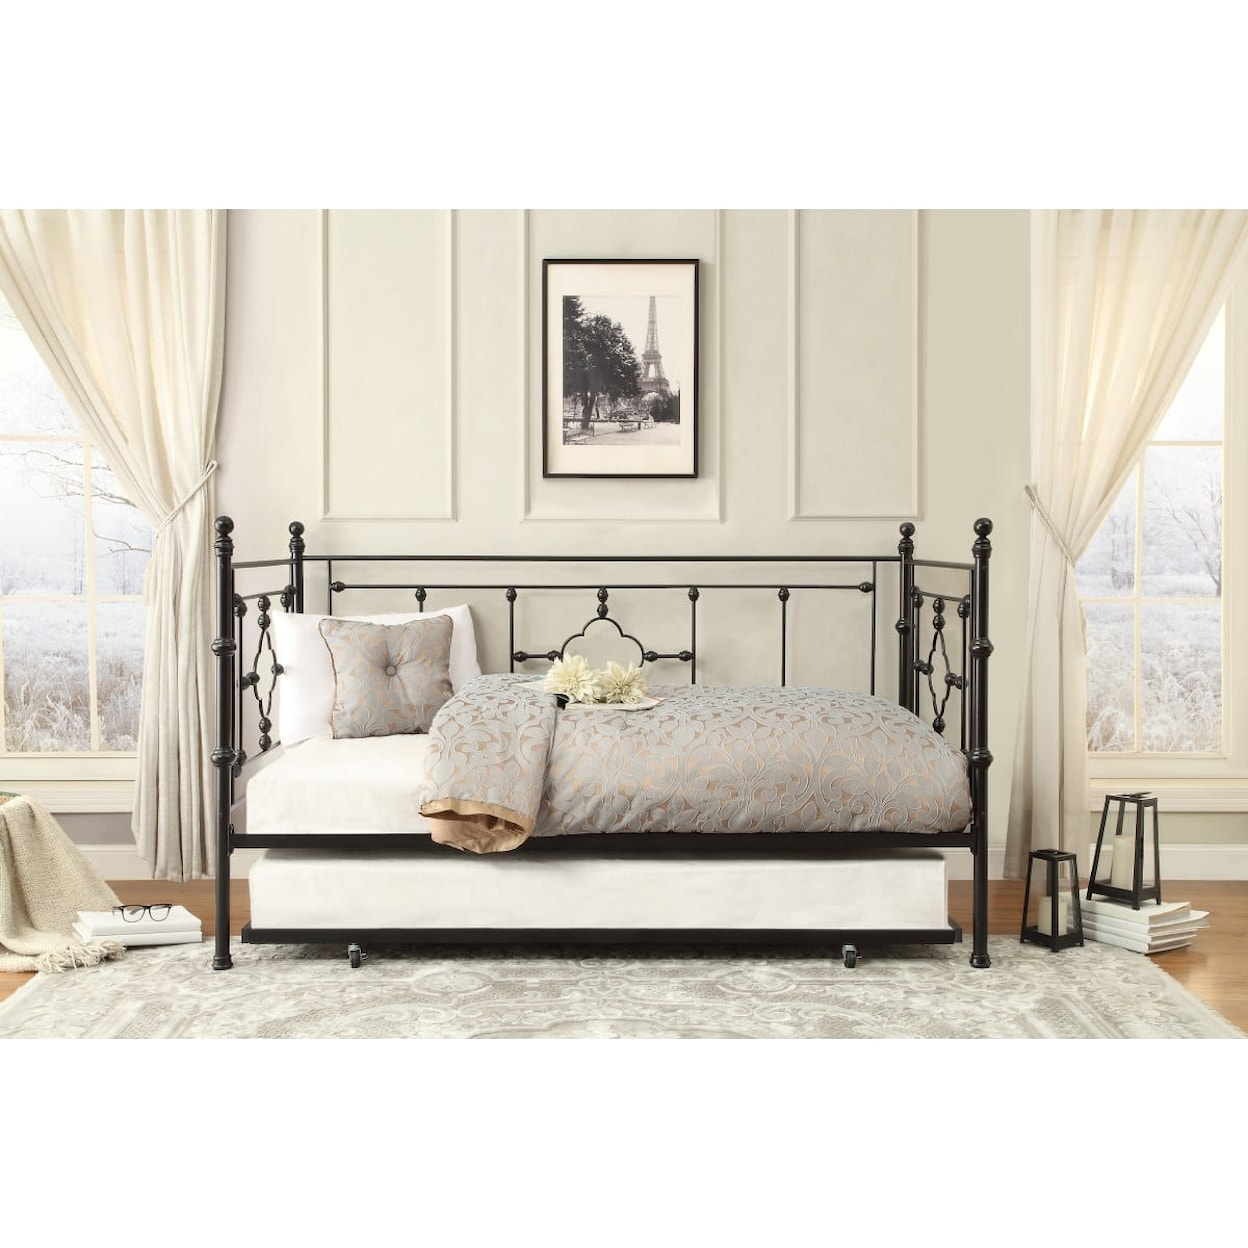 Homelegance Auberon Daybed with Trundle